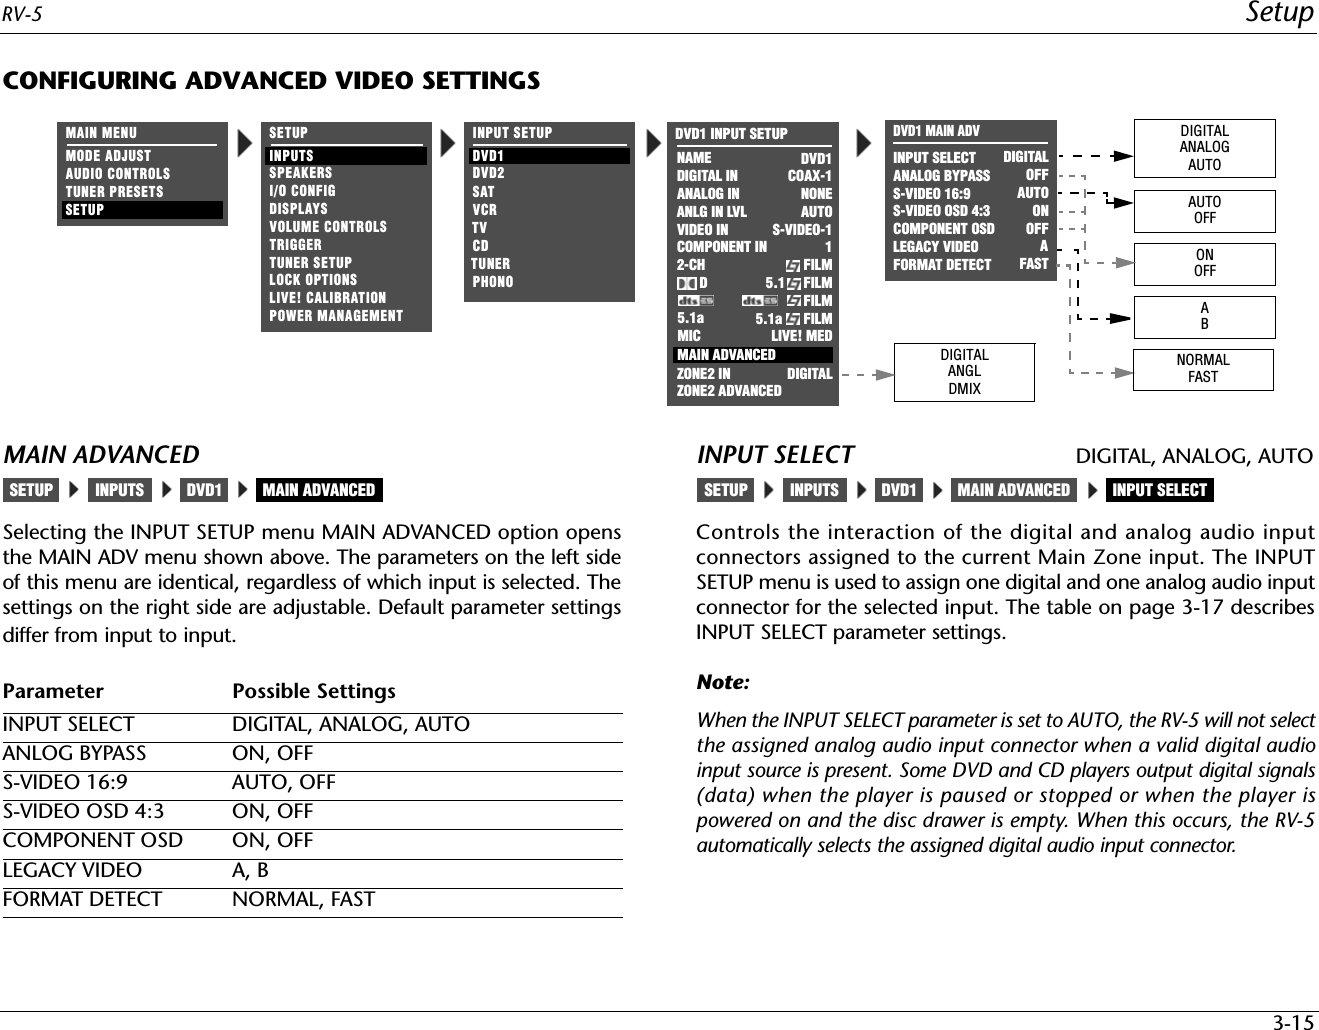 RV-5 Setup3-15CONFIGURING ADVANCED VIDEO SETTINGSMAIN ADVANCEDSelecting the INPUT SETUP menu MAIN ADVANCED option opensthe MAIN ADV menu shown above. The parameters on the left sideof this menu are identical, regardless of which input is selected. Thesettings on the right side are adjustable. Default parameter settingsdiffer from input to input.INPUT SELECT DIGITAL, ANALOG, AUTOControls the interaction of the digital and analog audio inputconnectors assigned to the current Main Zone input. The INPUTSETUP menu is used to assign one digital and one analog audio inputconnector for the selected input. The table on page 3-17 describesINPUT SELECT parameter settings.Note:When the INPUT SELECT parameter is set to AUTO, the RV-5 will not selectthe assigned analog audio input connector when a valid digital audioinput source is present. Some DVD and CD players output digital signals(data) when the player is paused or stopped or when the player ispowered on and the disc drawer is empty. When this occurs, the RV-5automatically selects the assigned digital audio input connector.DVD1 MAIN ADVINPUT SELECT ANALOG BYPASS S-VIDEO 16:9 S-VIDEO OSD 4:3COMPONENT OSDDIGITALOFFAUTOONOFFDIGITALANGLDMIXDIGITALANALOGAUTOAUTOOFFONOFFDVD1 INPUT SETUPNAMEDIGITAL INANALOG INVIDEO INCOMPONENT IN2-CHMIC      DDVD1COAX-1NONEAUTOS-VIDEO-11FILM5.1     FILMFILMANLG IN LVLLIVE! MEDMAIN ADVANCEDZONE2 IN DIGITALZONE2 ADVANCED5.1a FILM5.1a INPUT SETUPDVD2TVSATVCRCDTUNERPHONODVD1MAIN MENUMODE ADJUSTAUDIO CONTROLSTUNER PRESETSSETUPSETUPINPUTSSPEAKERSI/O CONFIGDISPLAYSVOLUME CONTROLSTRIGGERLOCK OPTIONSLIVE! CALIBRATIONTUNER SETUPLEGACY VIDEOPOWER MANAGEMENTFORMAT DETECT FASTABNORMALFASTAParameter Possible SettingsINPUT SELECT  DIGITAL, ANALOG, AUTOANLOG BYPASS ON, OFFS-VIDEO 16:9  AUTO, OFFS-VIDEO OSD 4:3  ON, OFFCOMPONENT OSD ON, OFFLEGACY VIDEO A, BFORMAT DETECT NORMAL, FASTINPUTSSETUP DVD1 MAIN ADVANCED INPUTSSETUP DVD1 MAIN ADVANCED INPUT SELECT